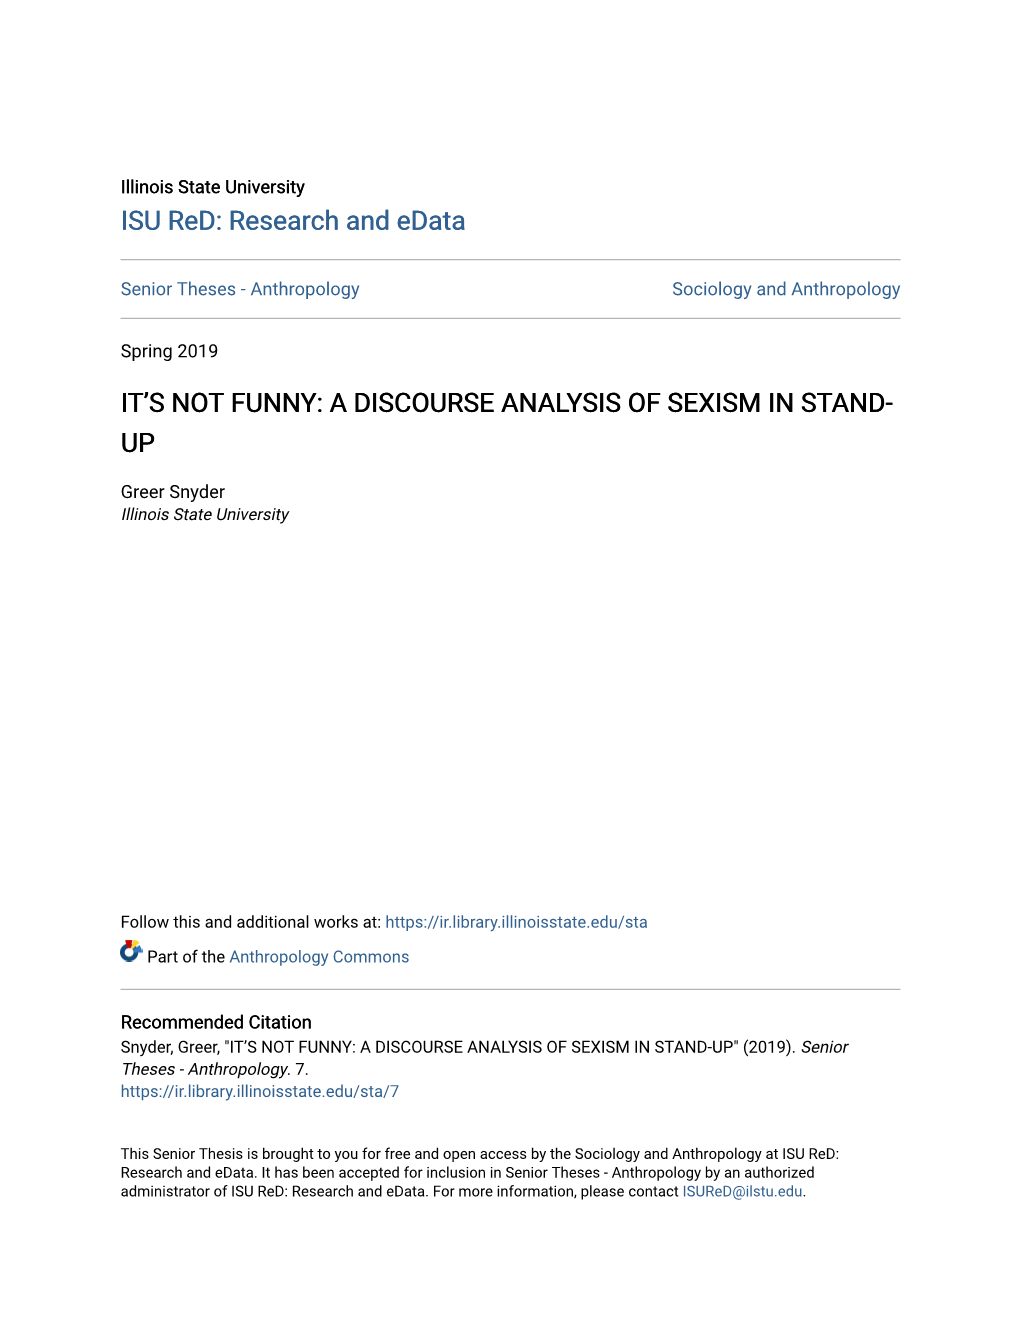 It's Not Funny: a Discourse Analysis of Sexism in Stand-Up